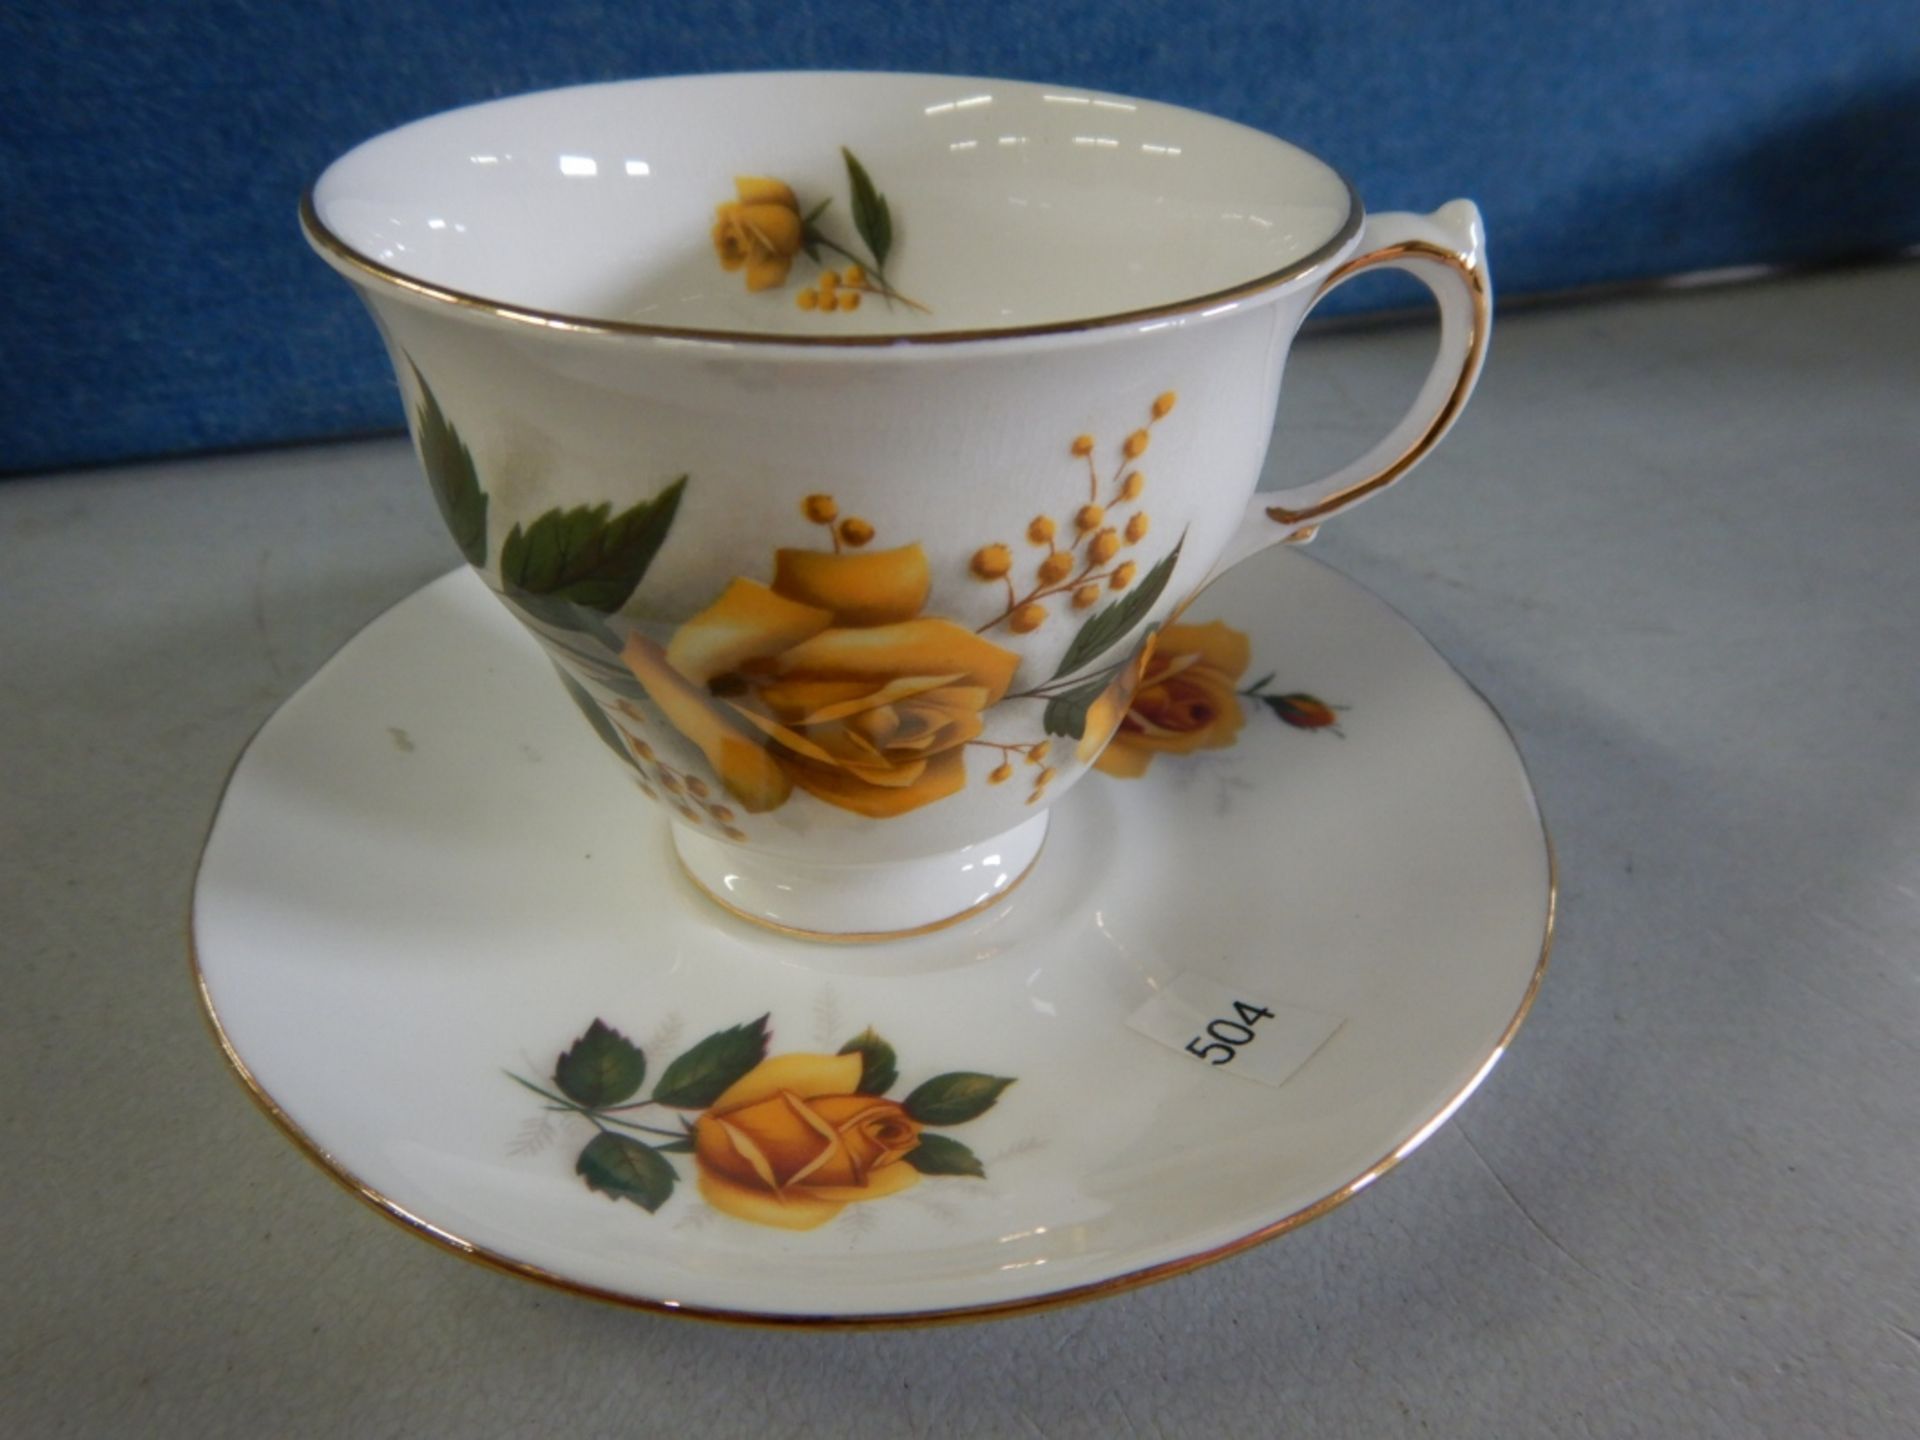 ANTIQUE TEACUPS & SAUCERS - MADE IN ENGLAND - LOT OF 7 - BONE CHINA #8273 - YELLOW FLOWERS, # - Image 20 of 33